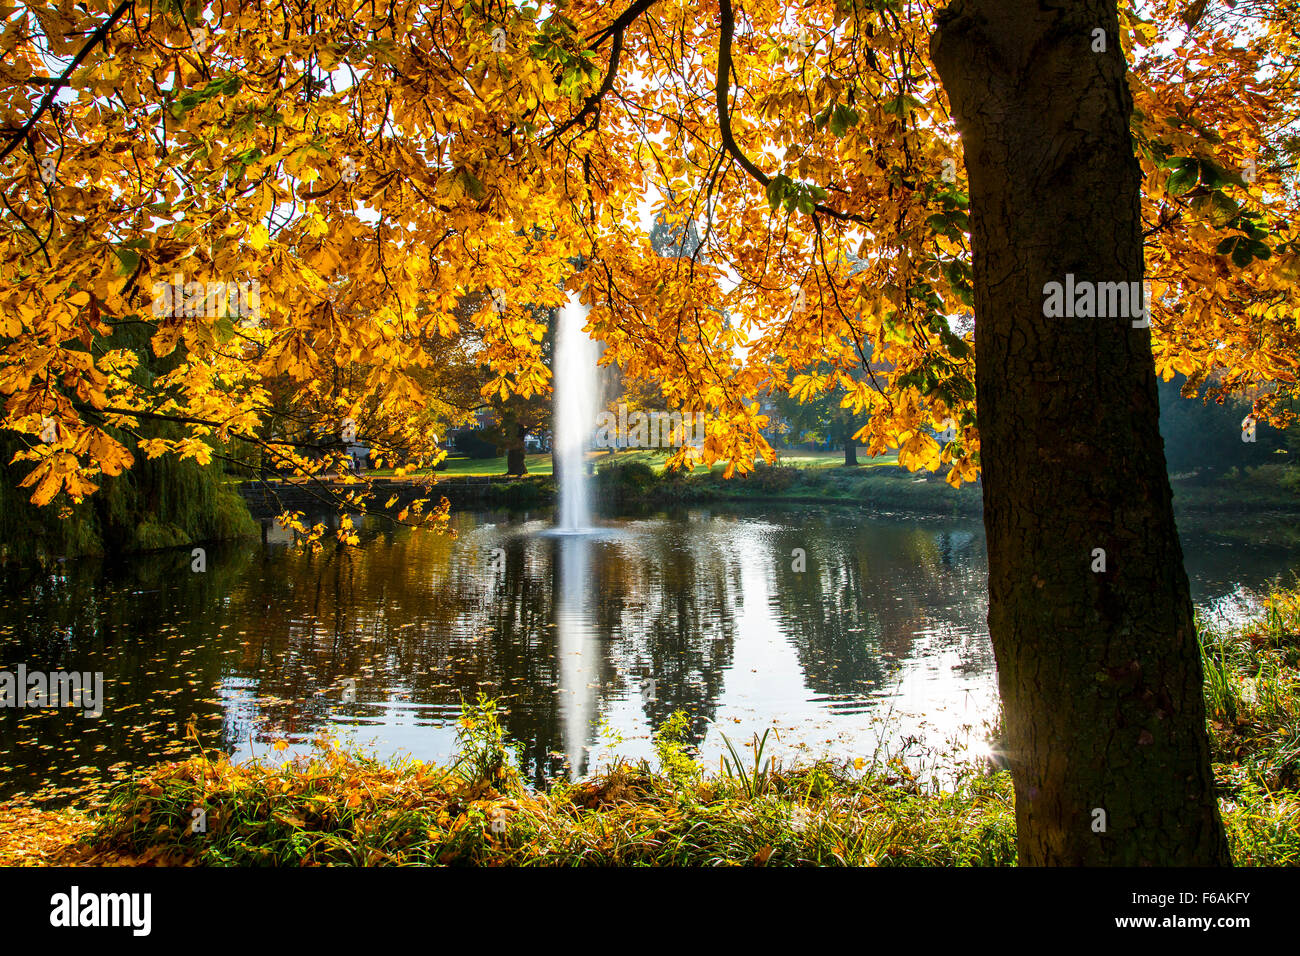 City park in Essen, Germany, pond and water fountain, RWE headquarter office tower building, Stock Photo